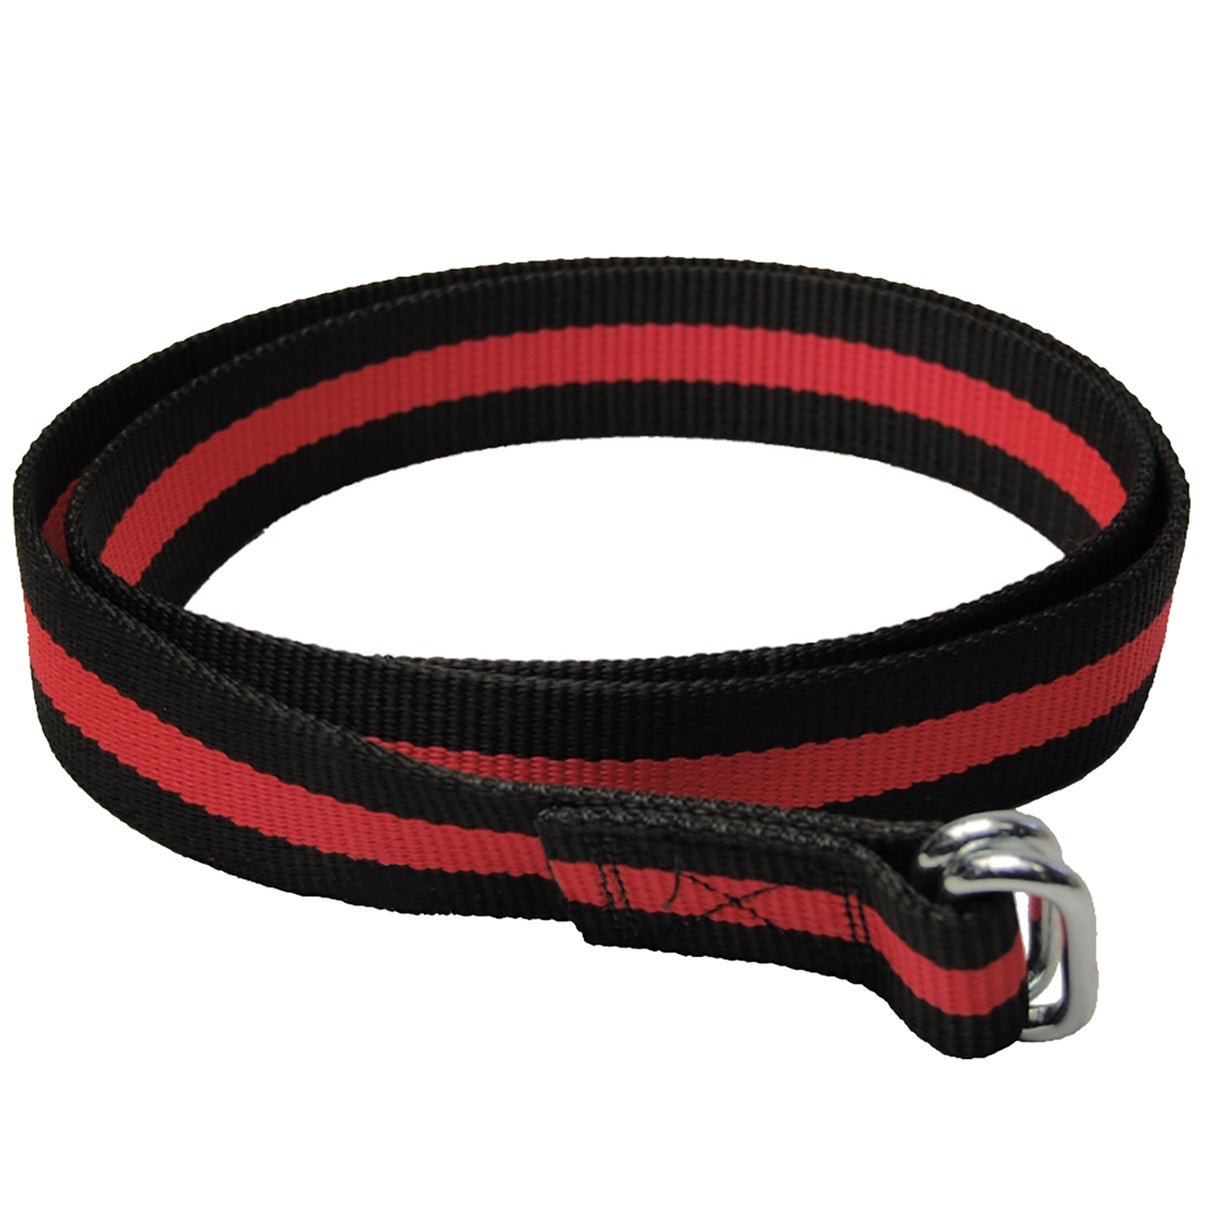 Collar Black Red With Link Buckle